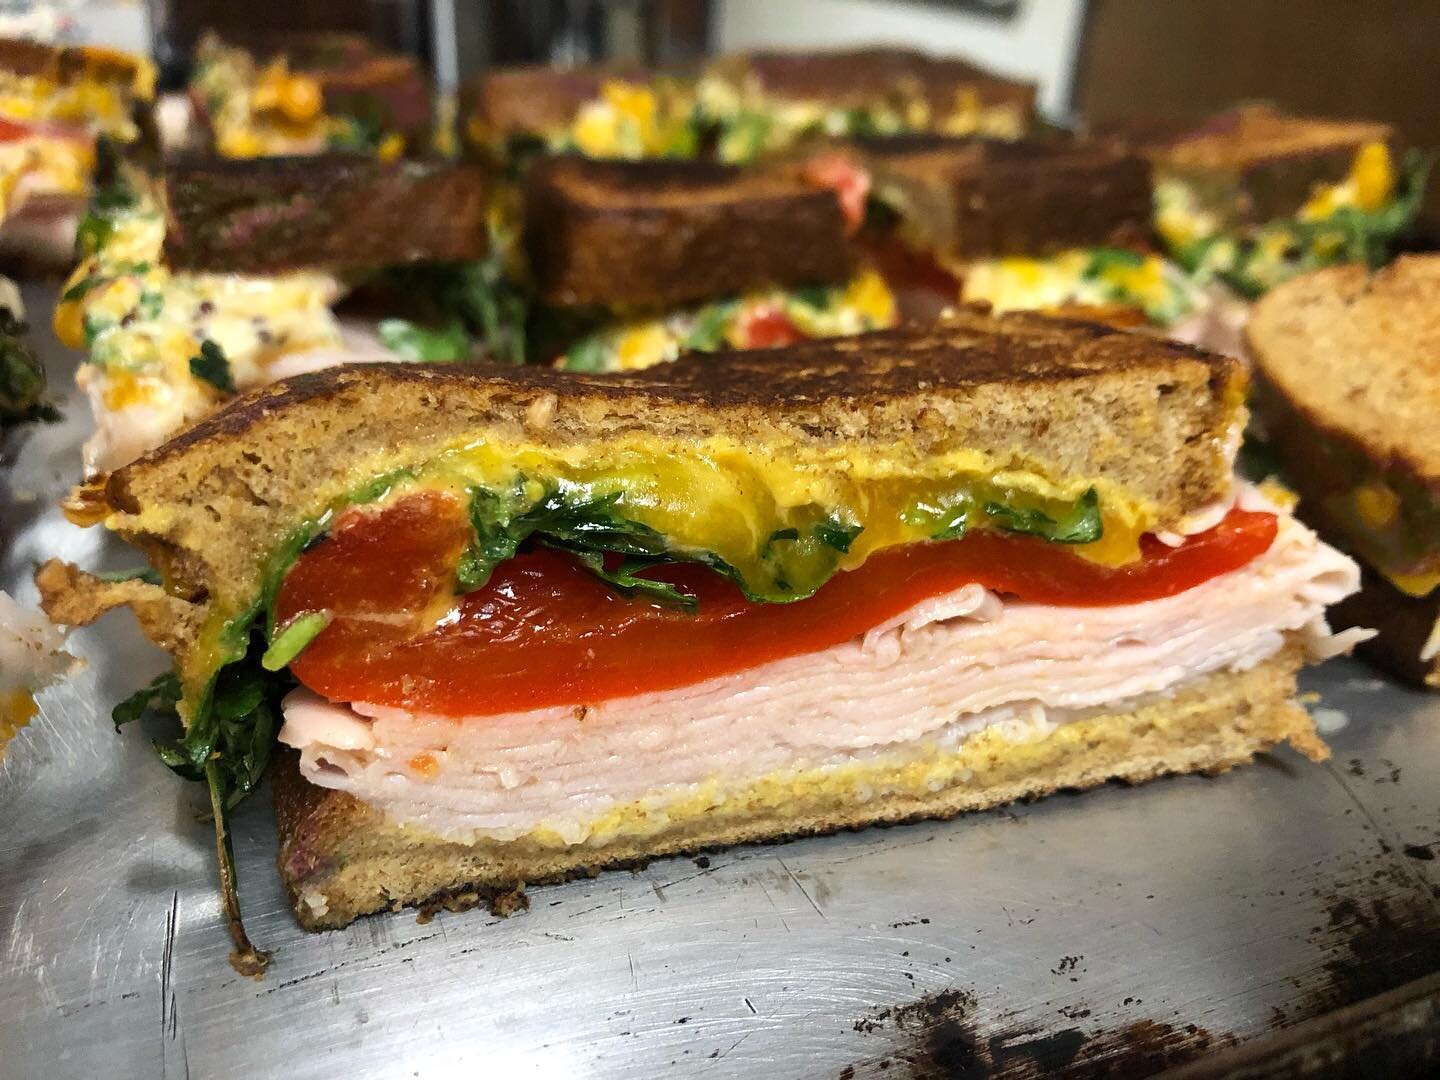 Made Turkey &amp; Cheddar Sandwiches at the 🔥🏚 last night. Smoked shaved turkey, pickled roasted red peppers, shredded cheddar cheese, arugala, &amp; Crema whole grain mustard sauce to the rescue as we had no idea what and little energy to cook. Th